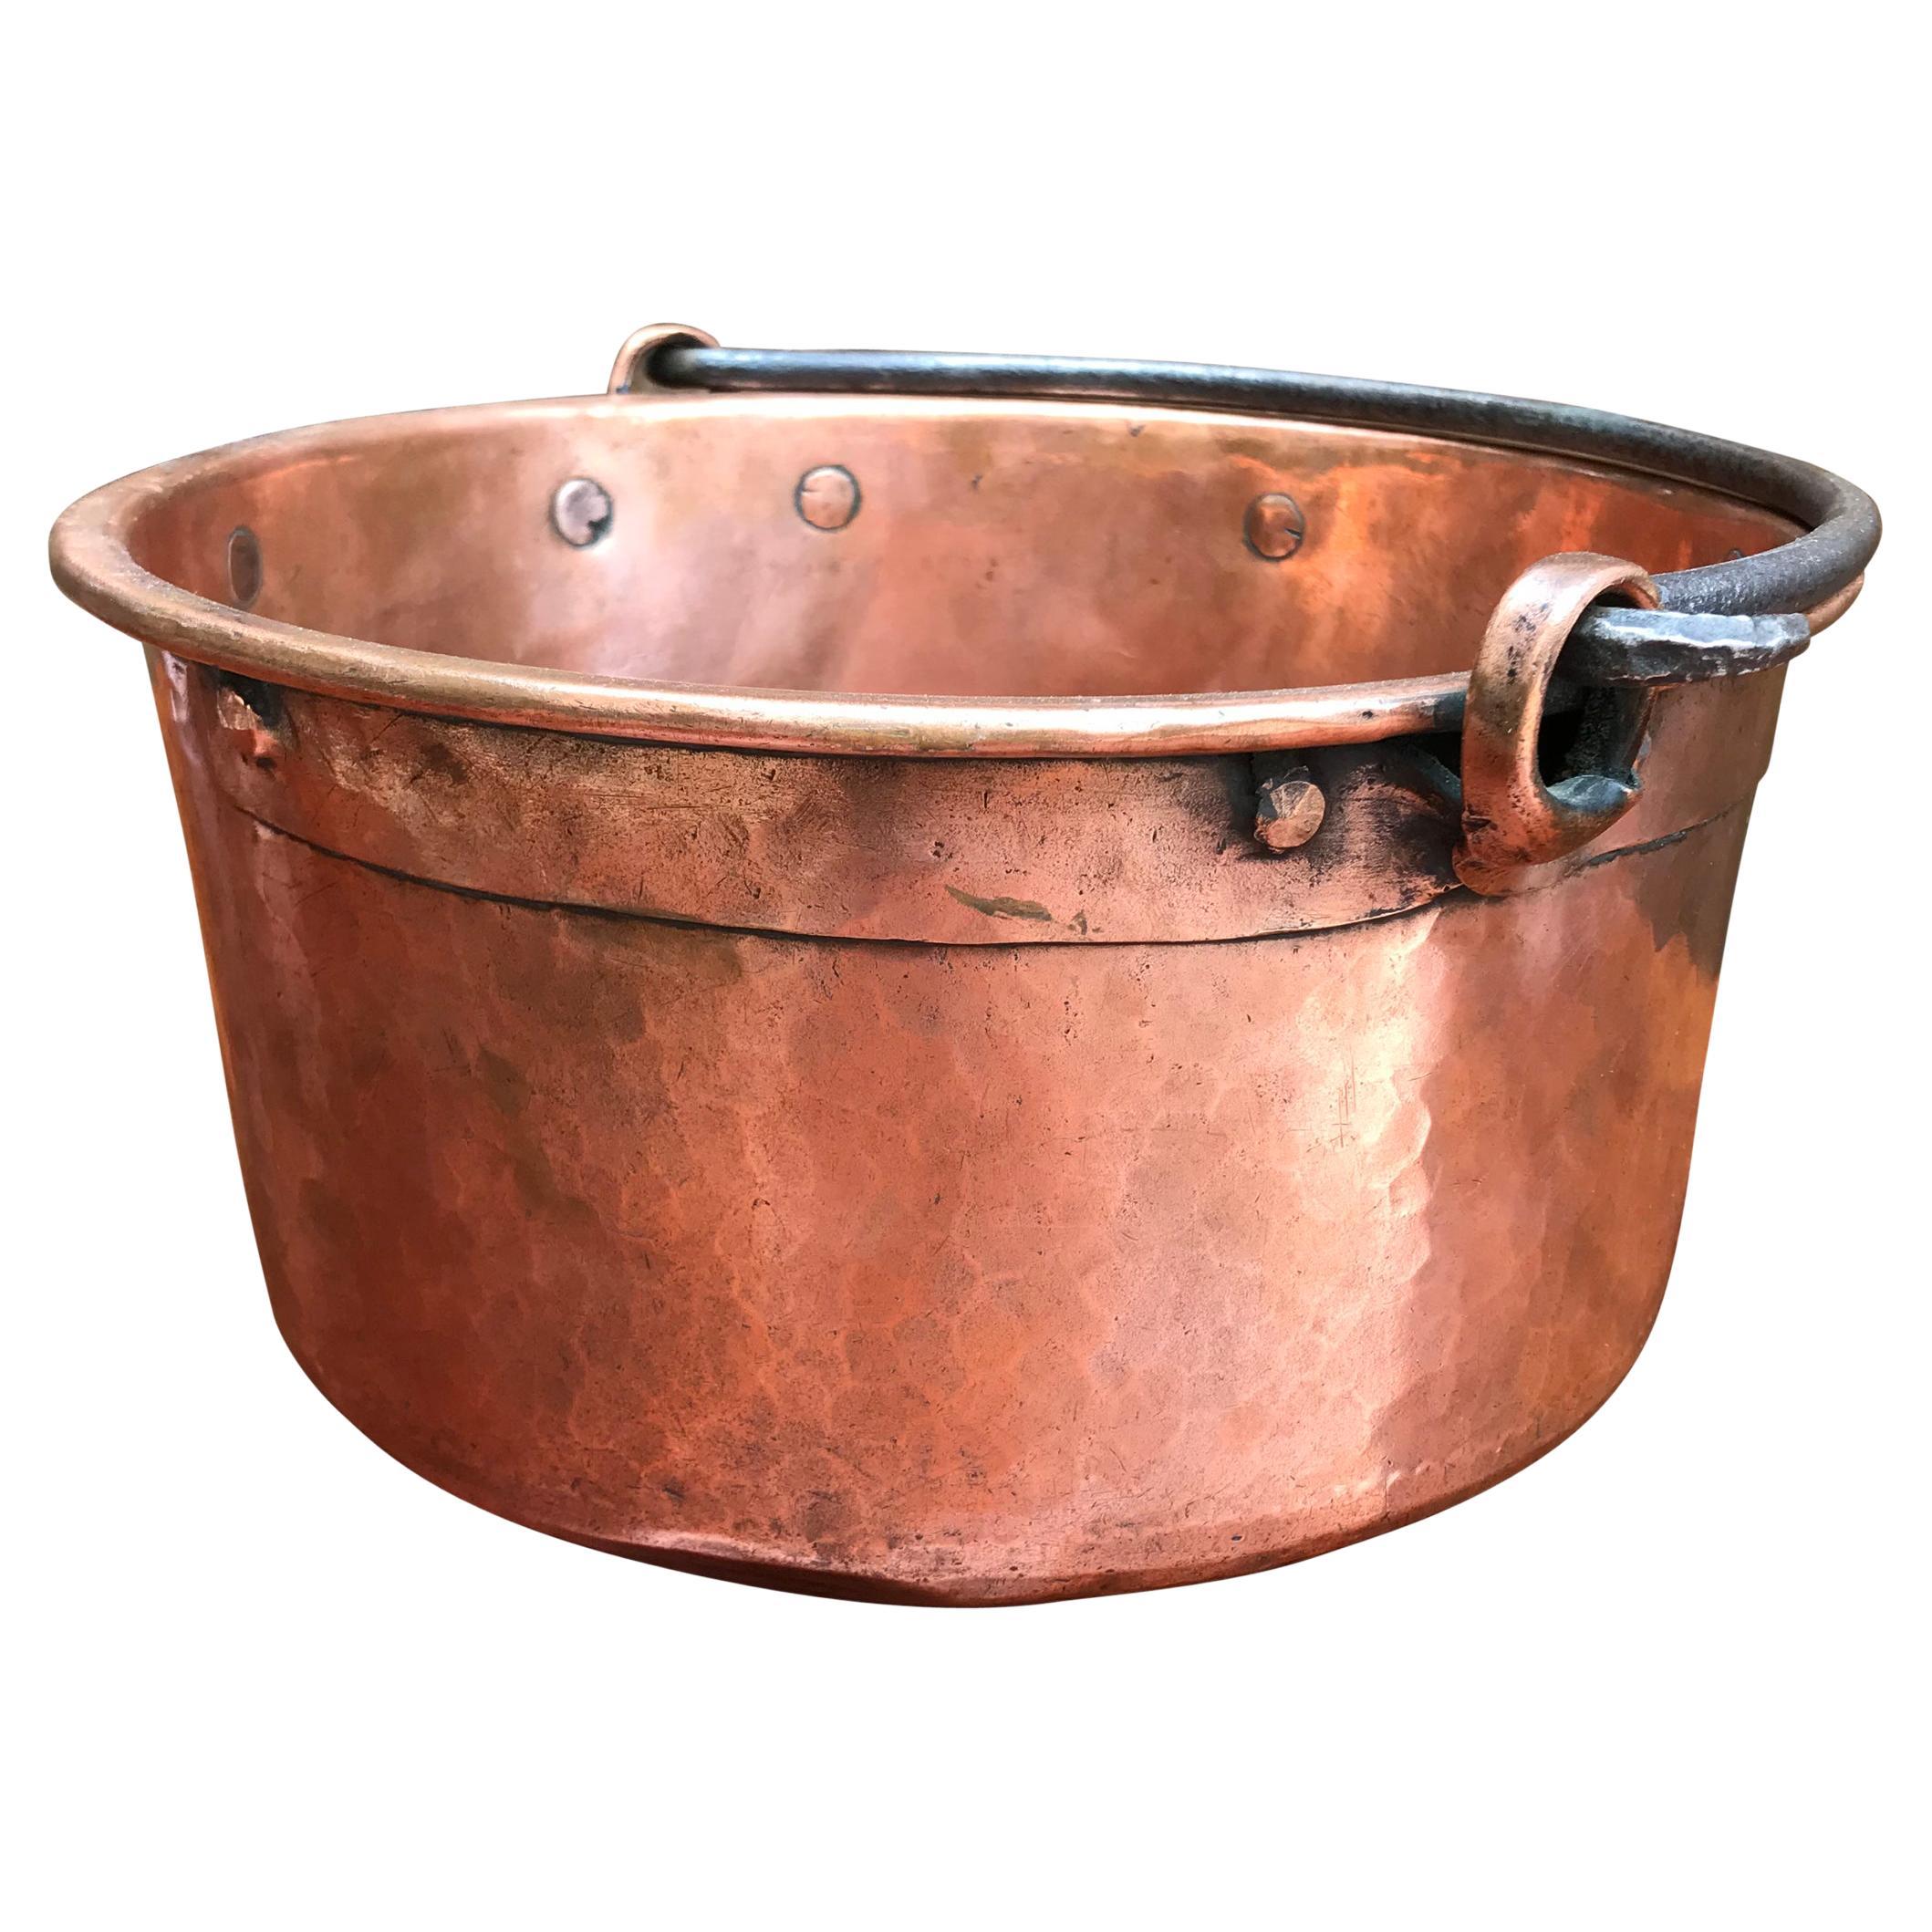 Early 19th Century French Hammered Copper Kettle